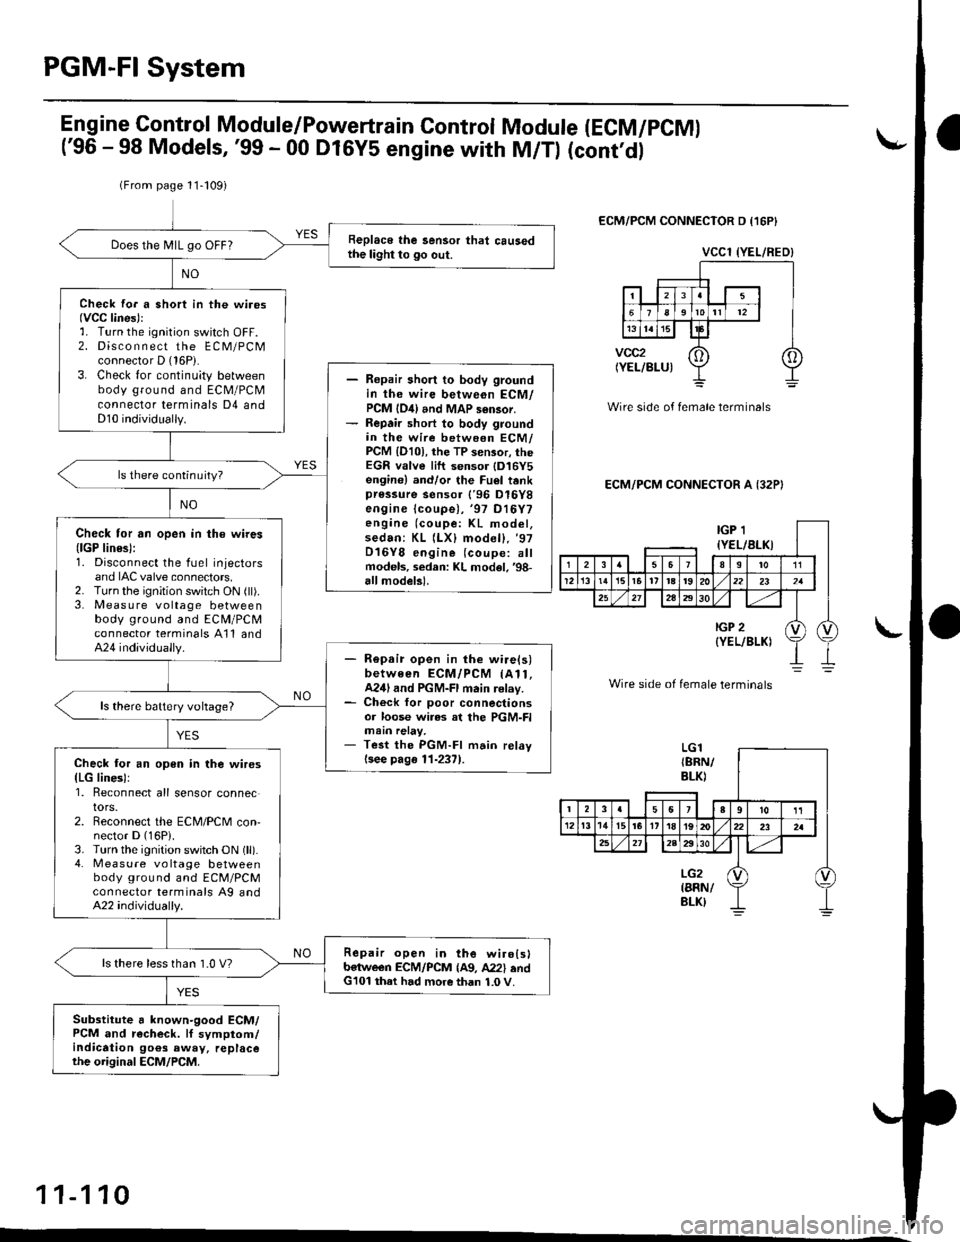 HONDA CIVIC 1999 6.G Workshop Manual PGM-FI System
(From page 11-109)
Replace the sensor that causedthe light to go out.Does the N4lL go OFF?
Check fo. a short in the wi.os(VCC lines)::. Turn the ignition switch OFF.2. Disco n n ect the